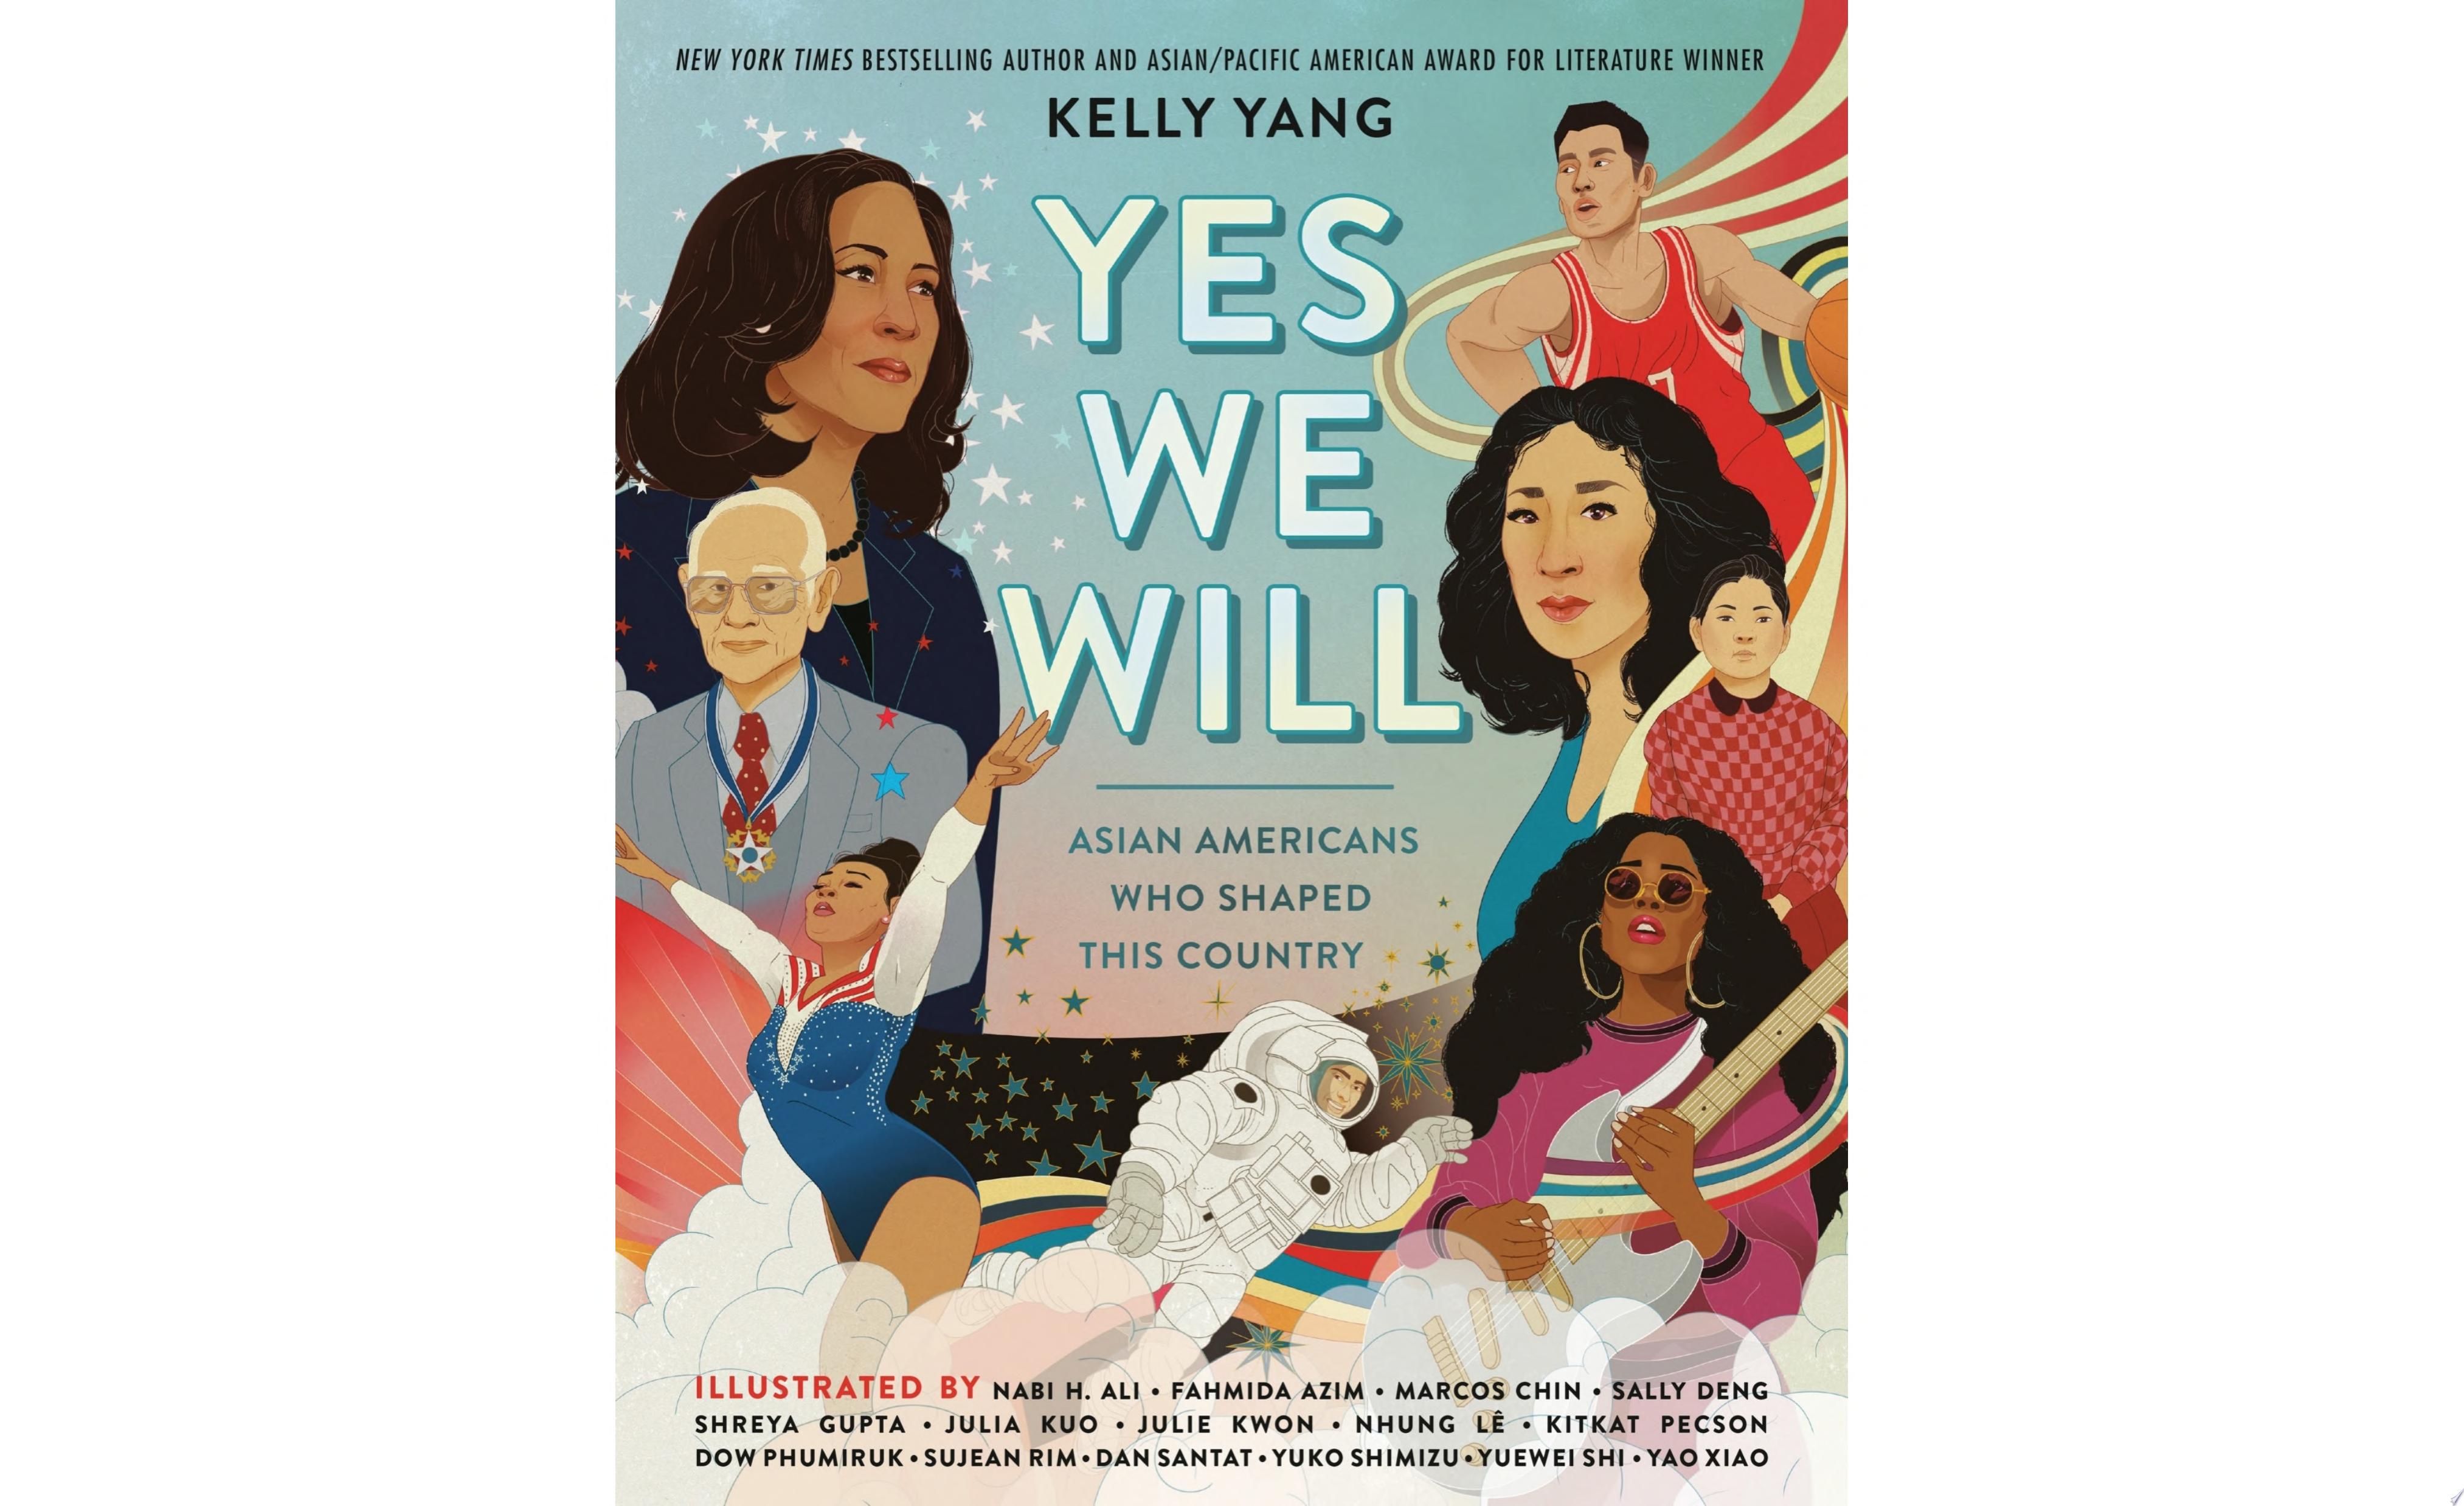 Image for "Yes We Will: Asian Americans Who Shaped This Country"